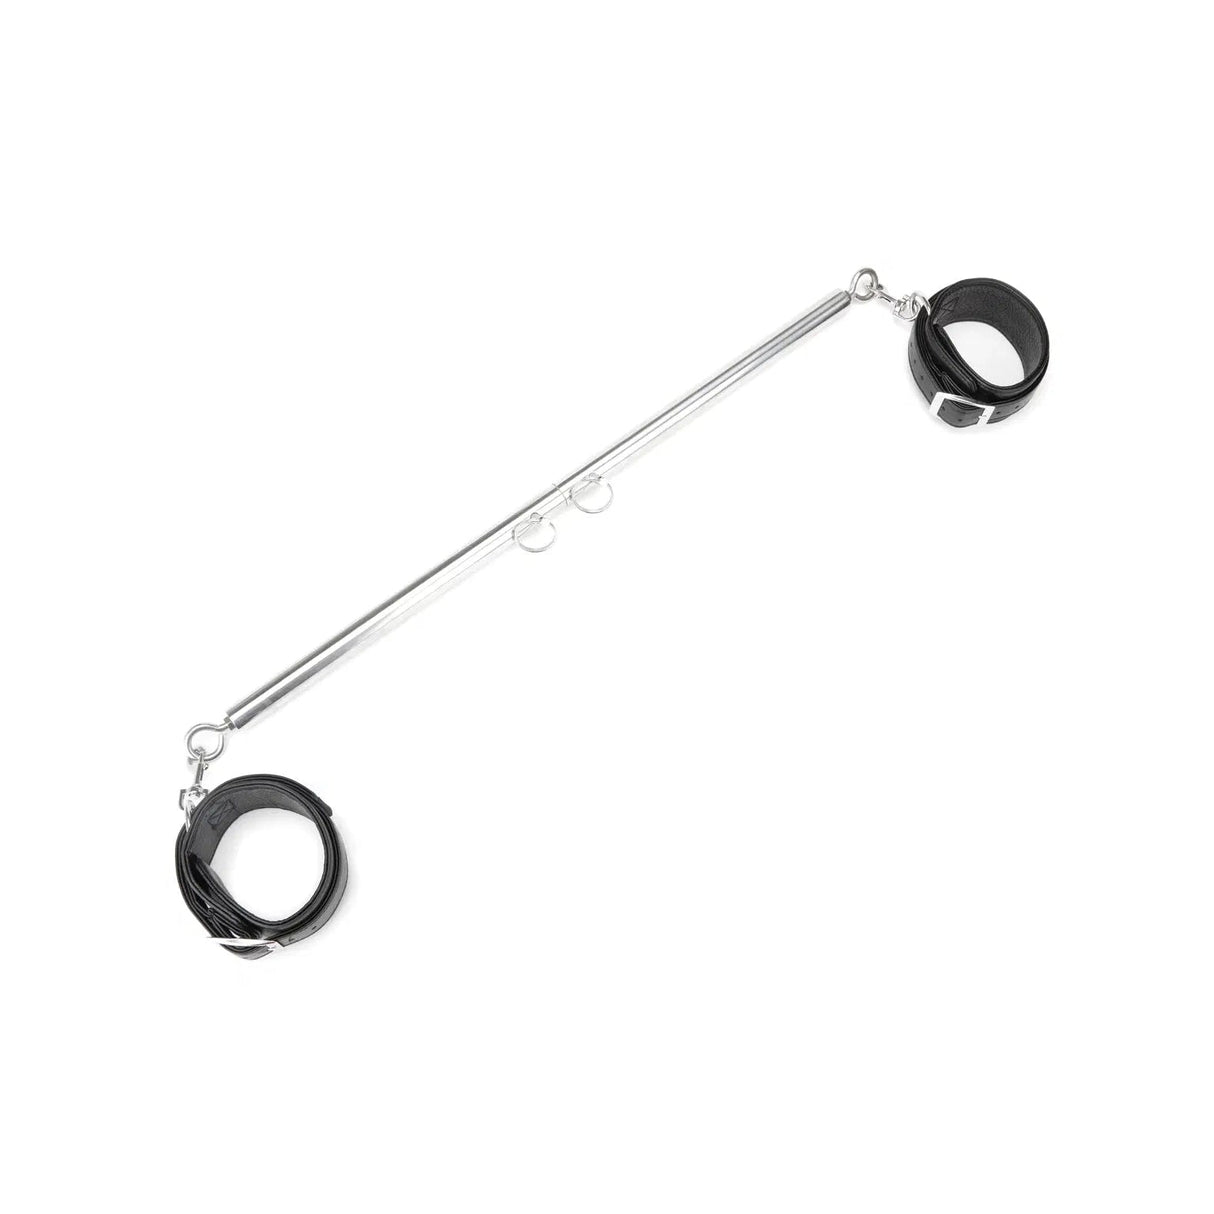 Expandable Spreader Bar Set with Cuffs